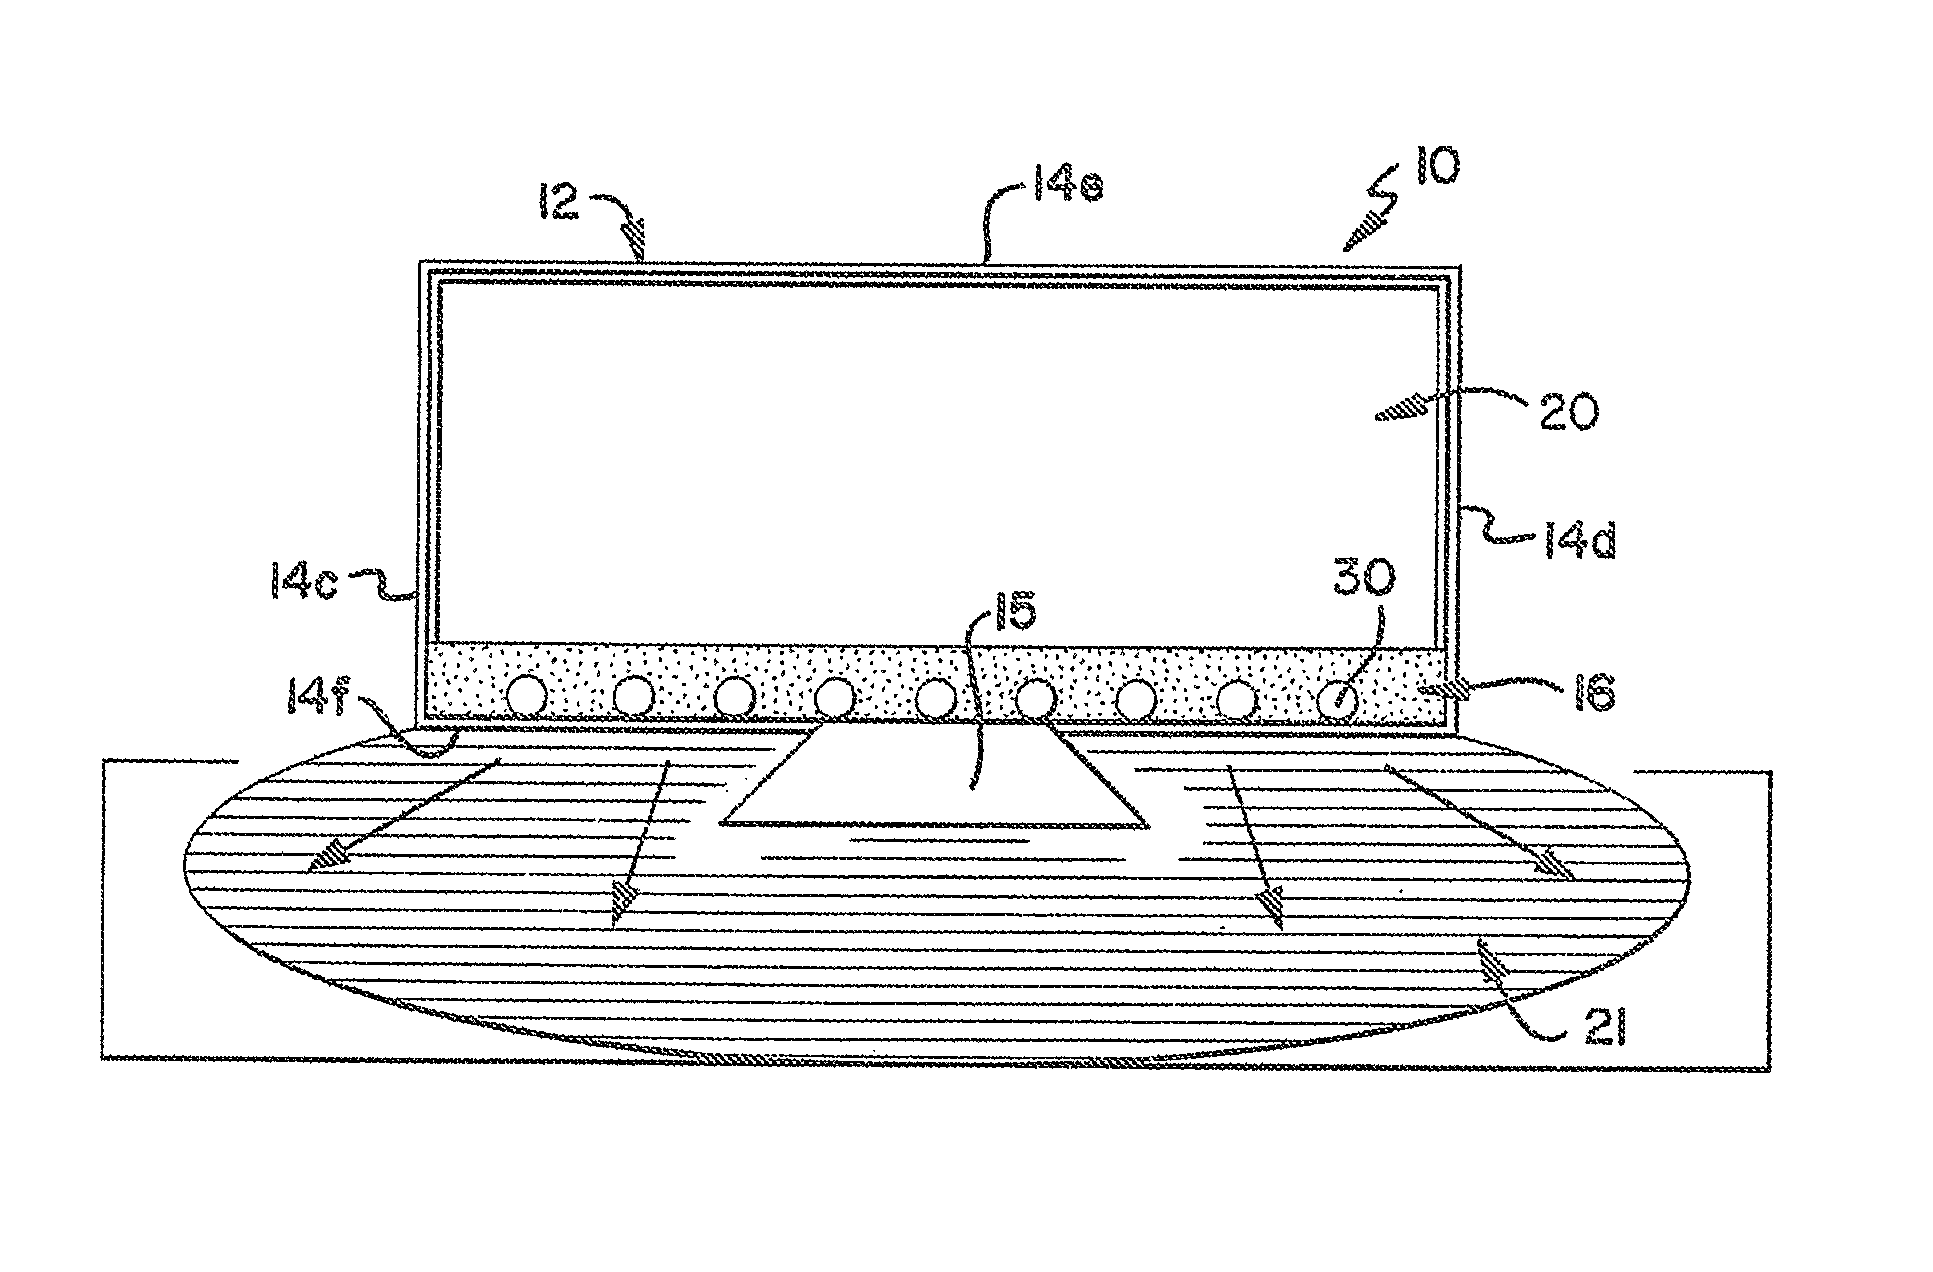 Electronic display device with integrated lighting system